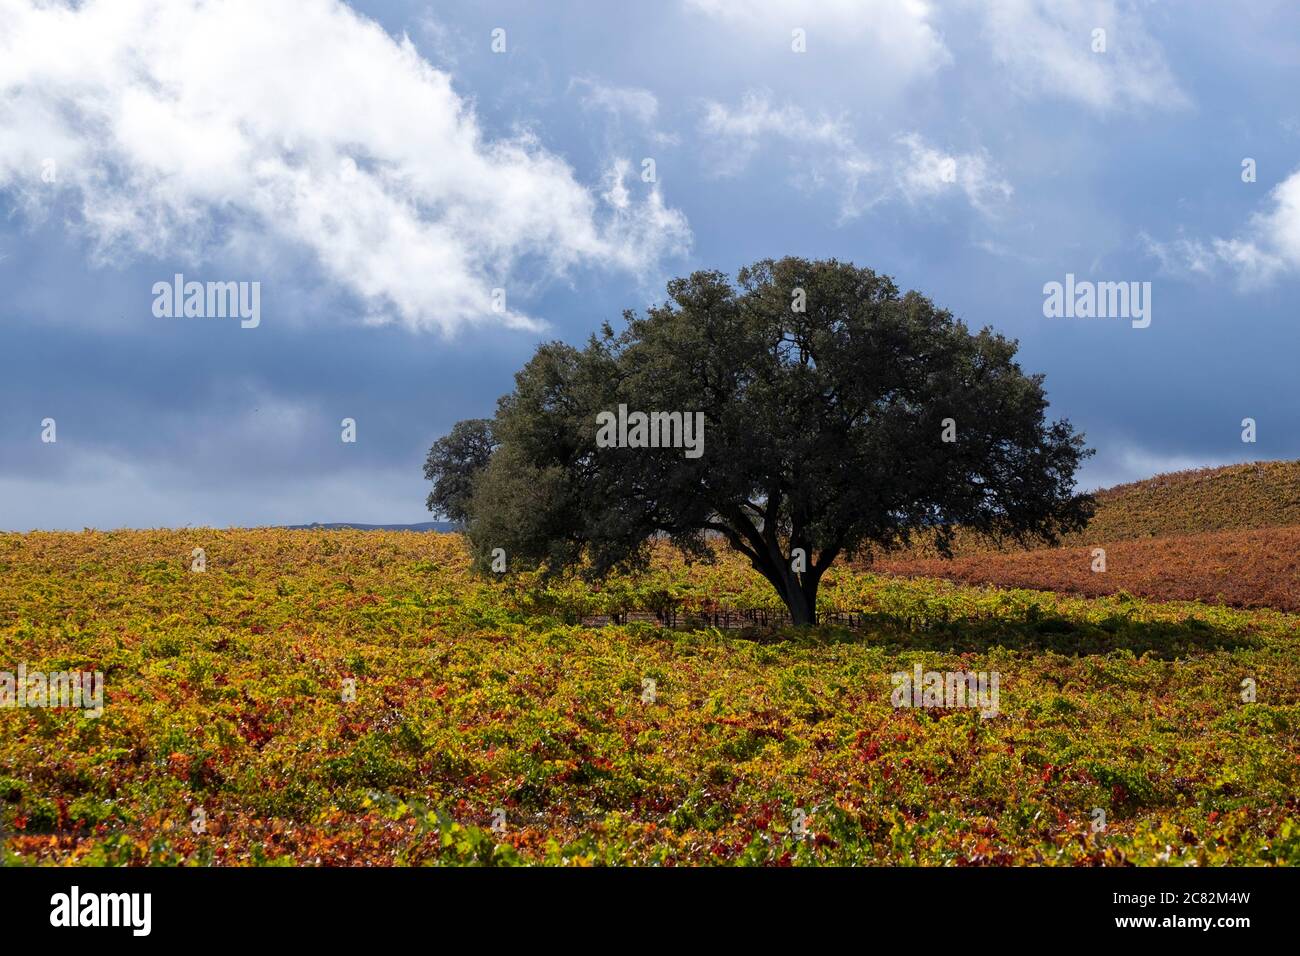 California Oak tree in a vineyard on a stormy fall dayl, near Paso Robles Stock Photo